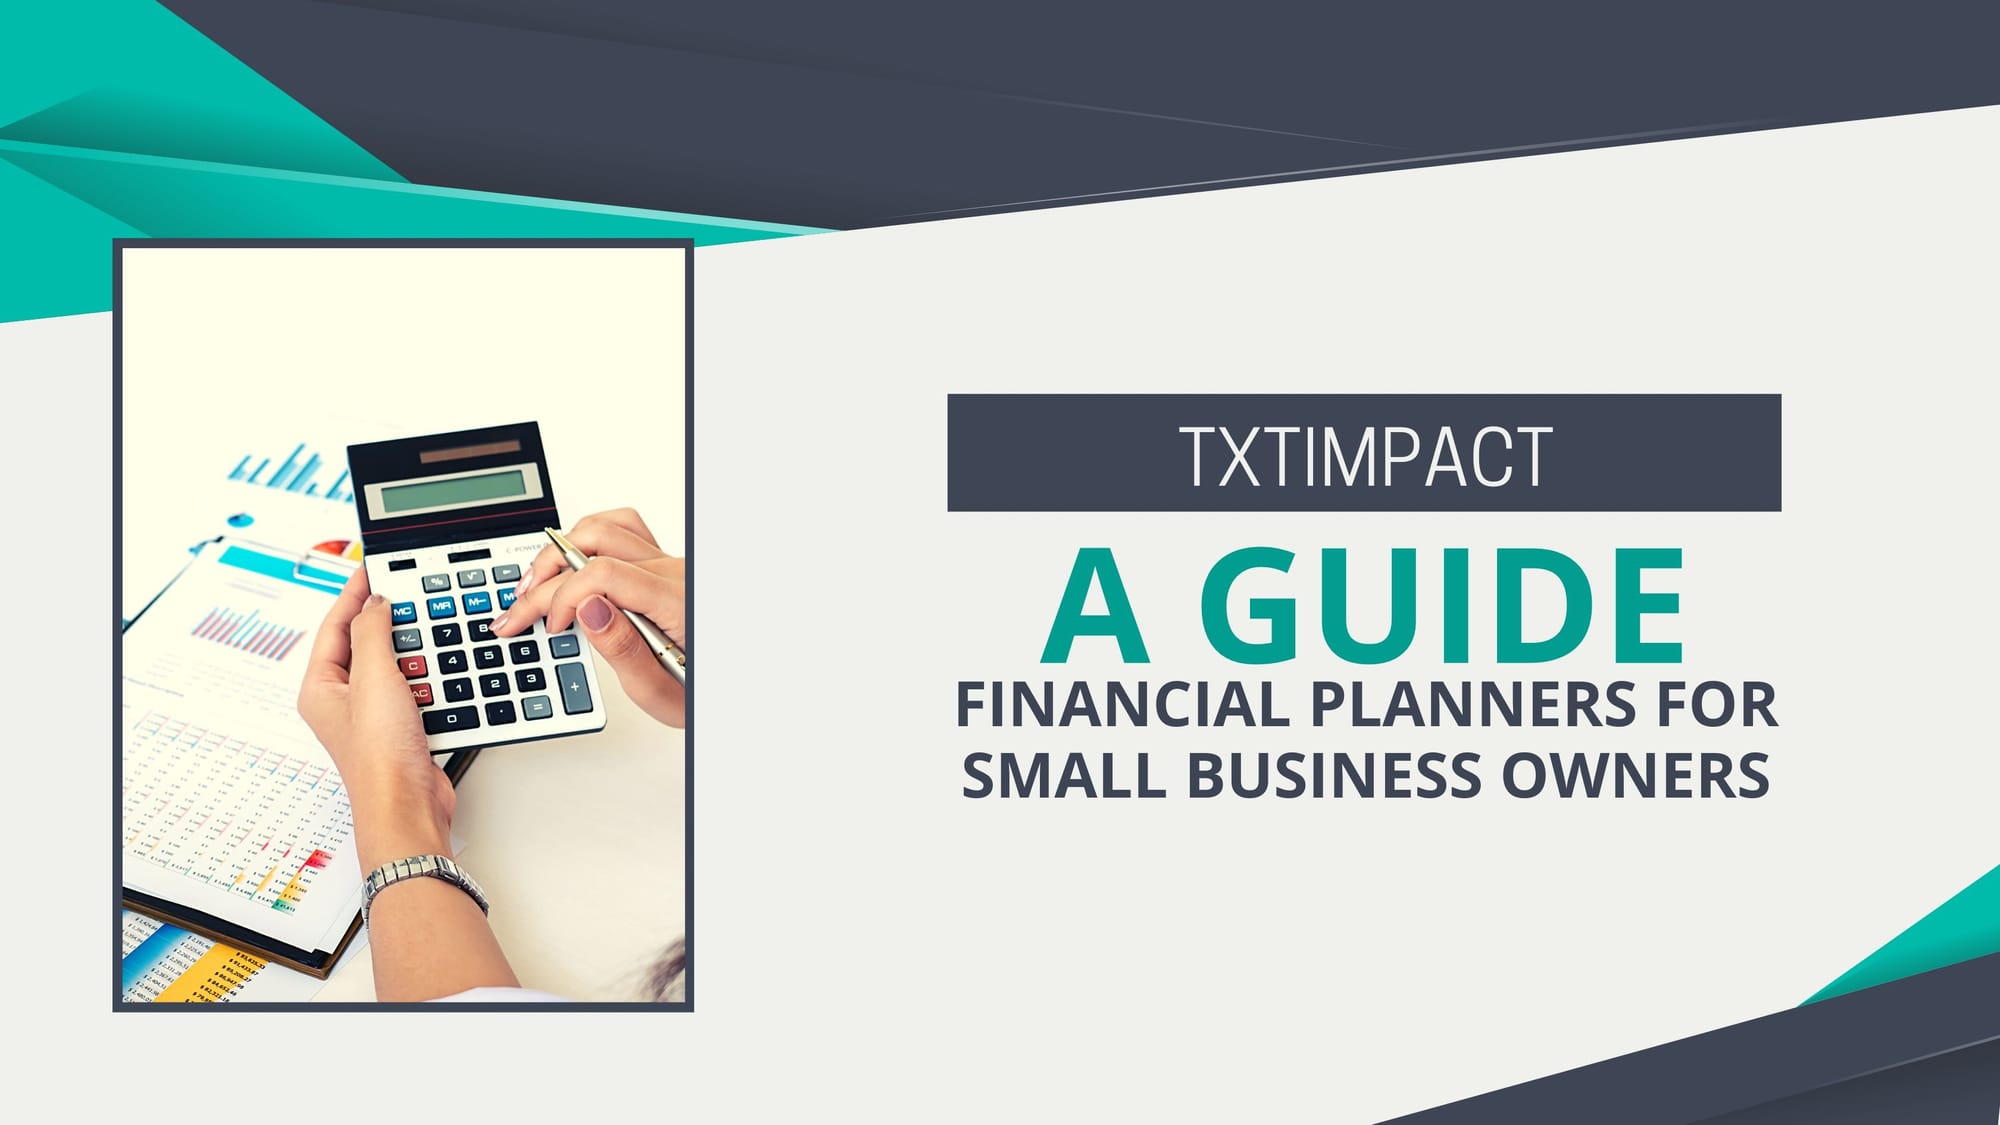 A Guide to Financial Planners for Small Business Owners (1).jpg